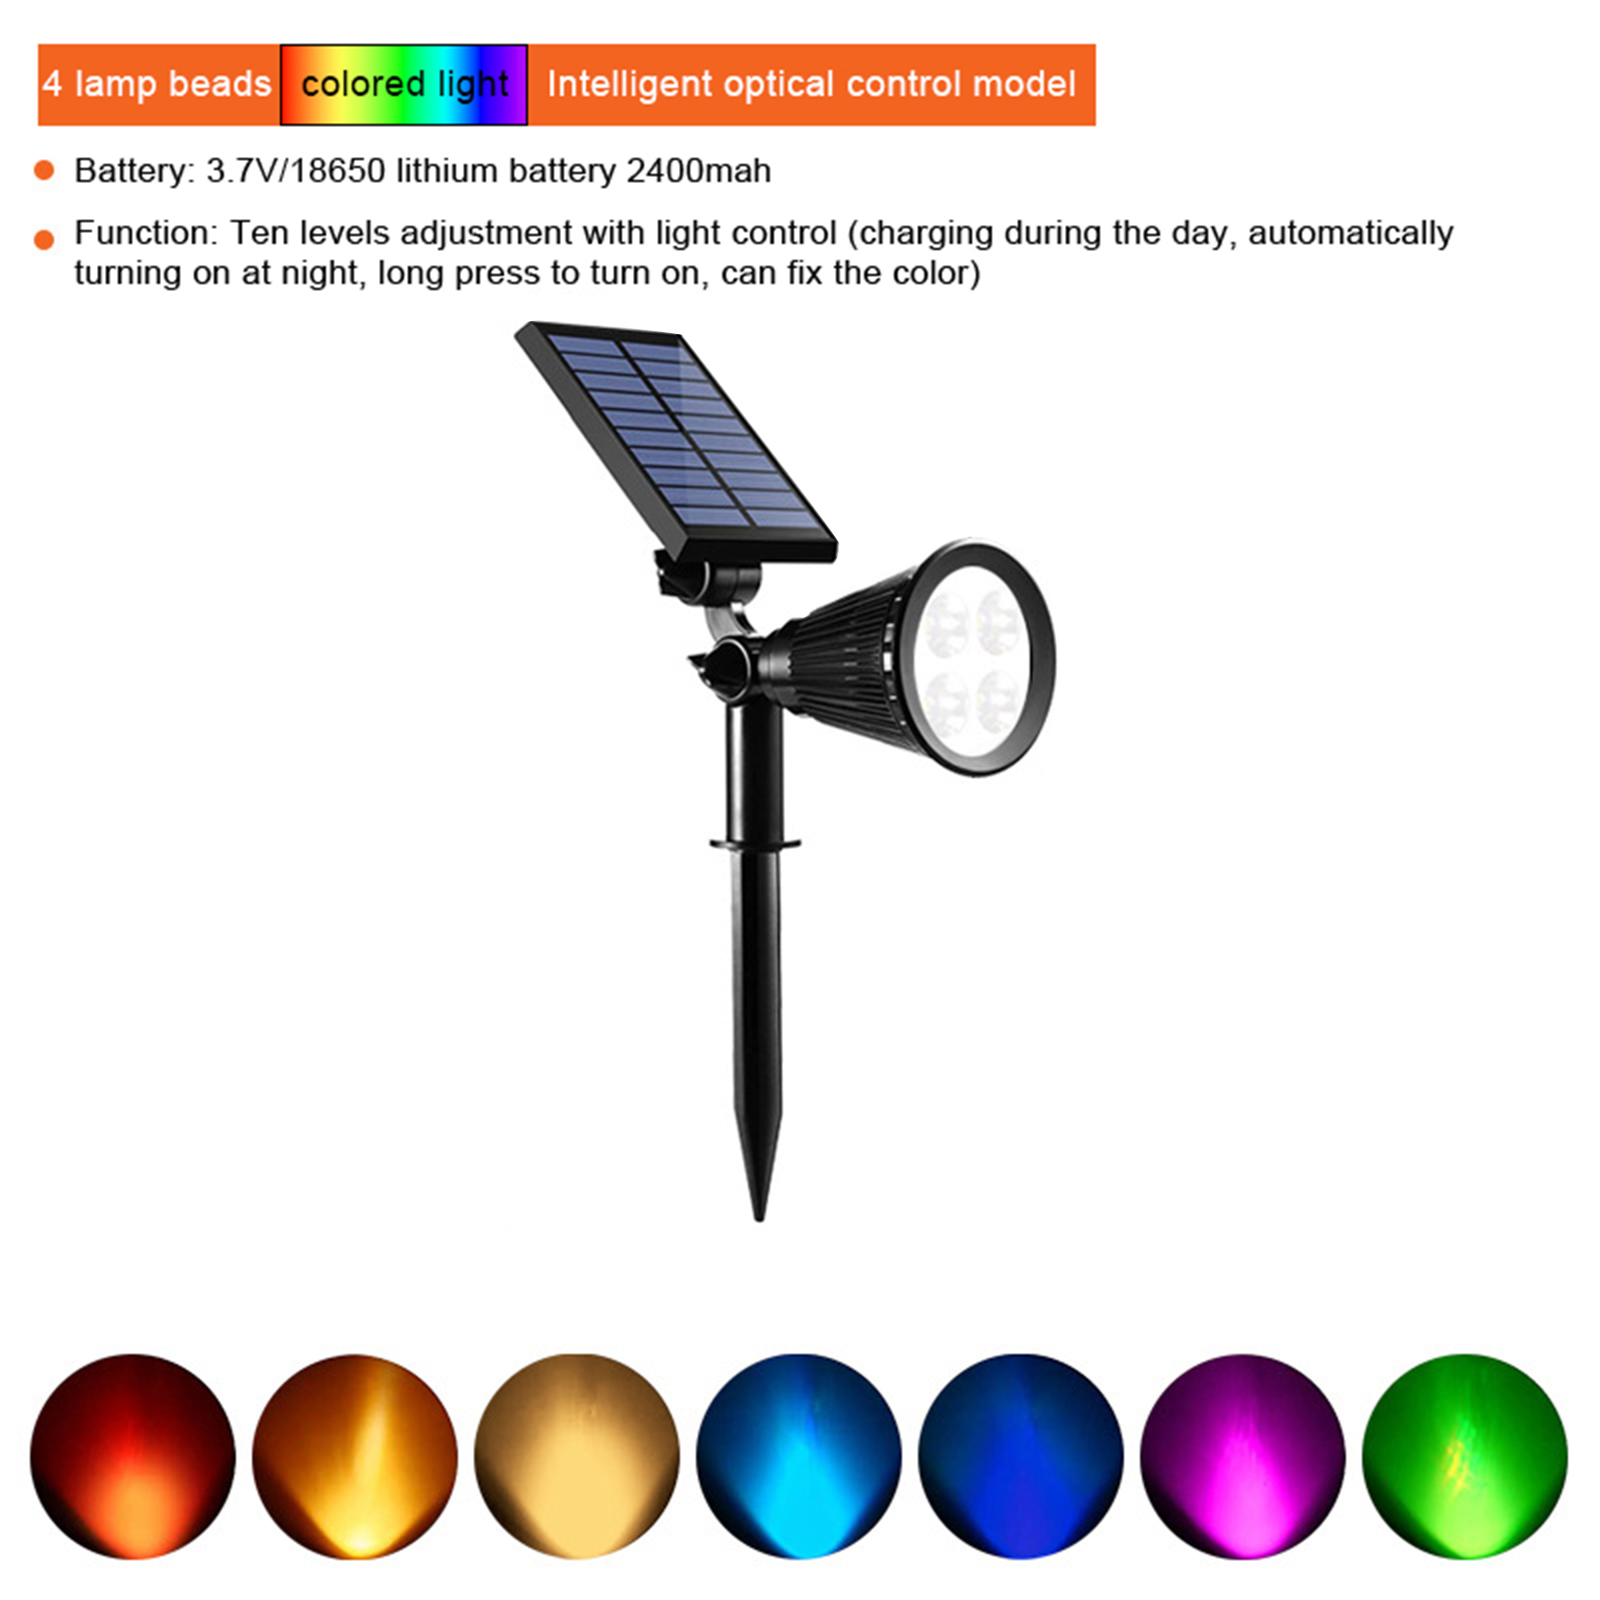 0.5w Outdoor Led Solar Spot Lights With 2200mah Large Capacity Battery Landscape Lights For Fence Pathway Trees Garden Yard